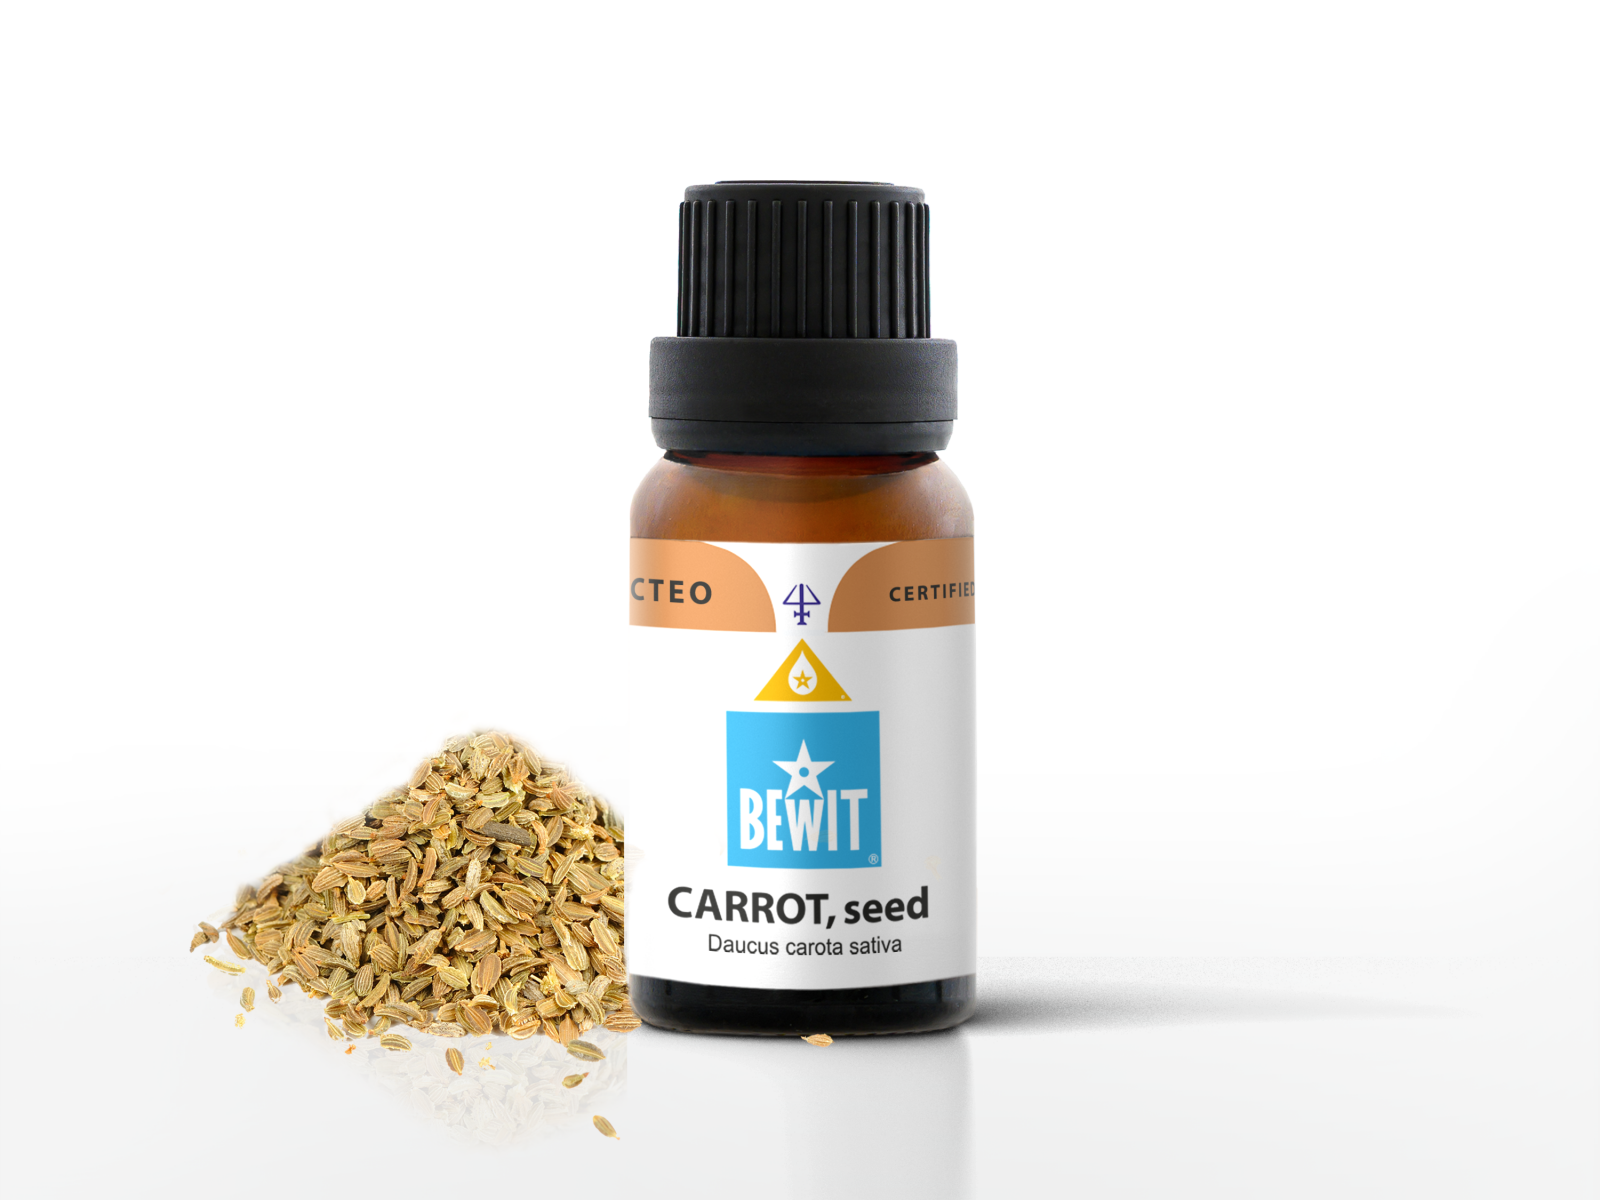 BEWIT Carrots, seeds - 100% pure essential oil - 1